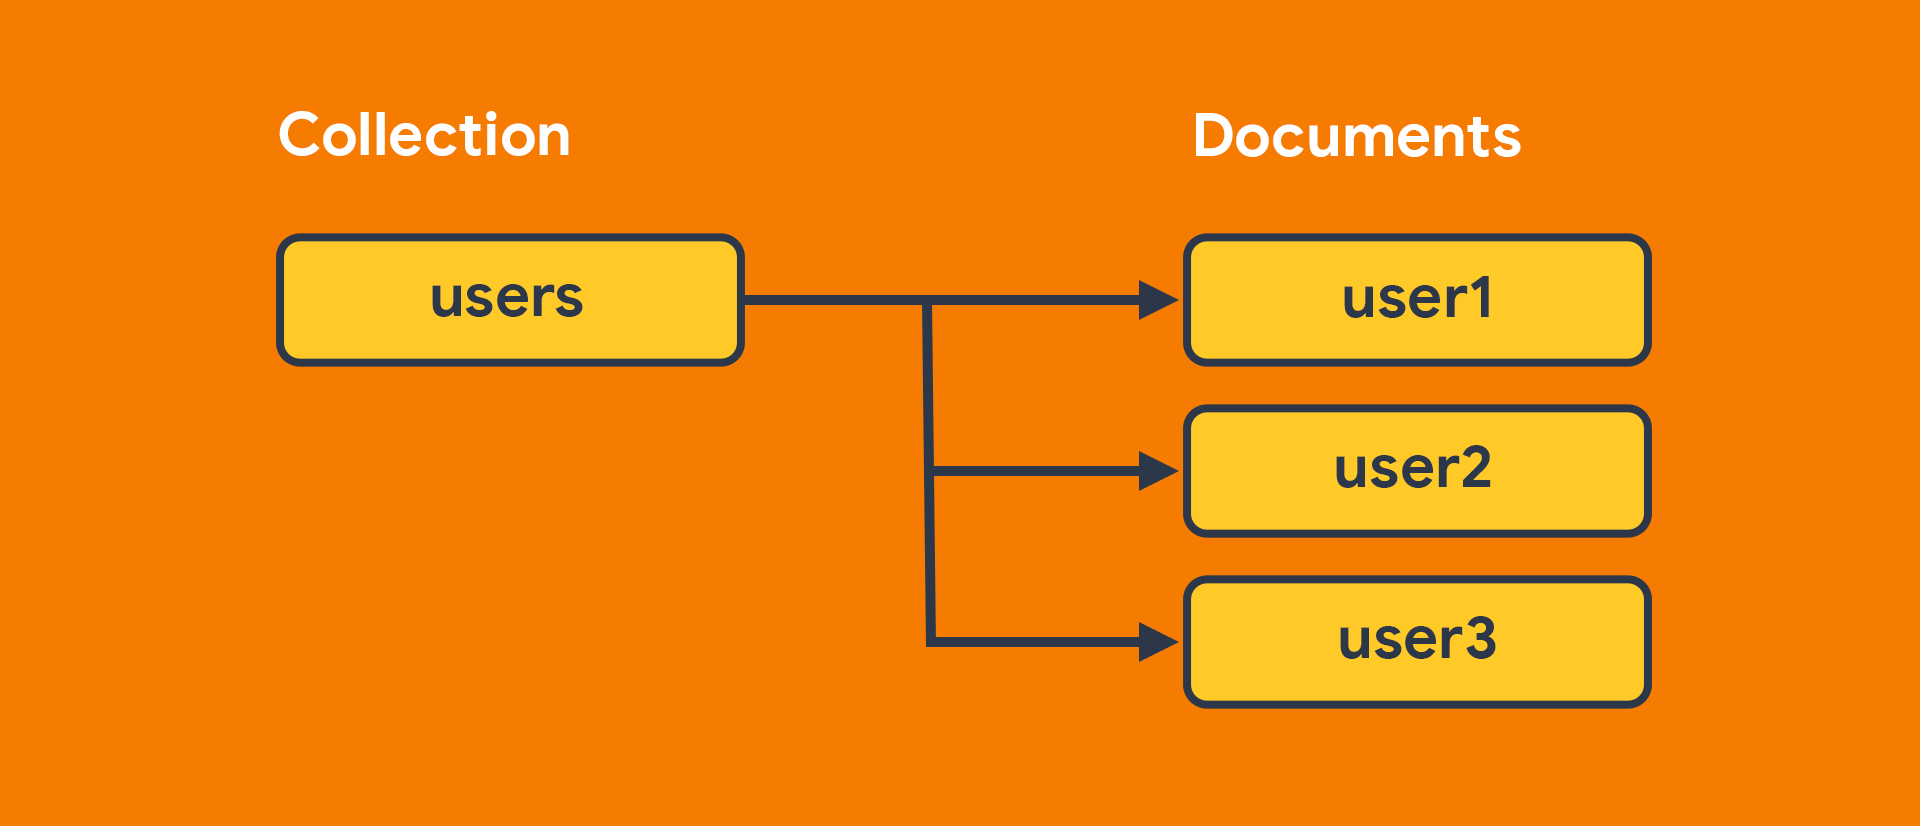 A collection called "users" containing three documents: user1, user2, and user3